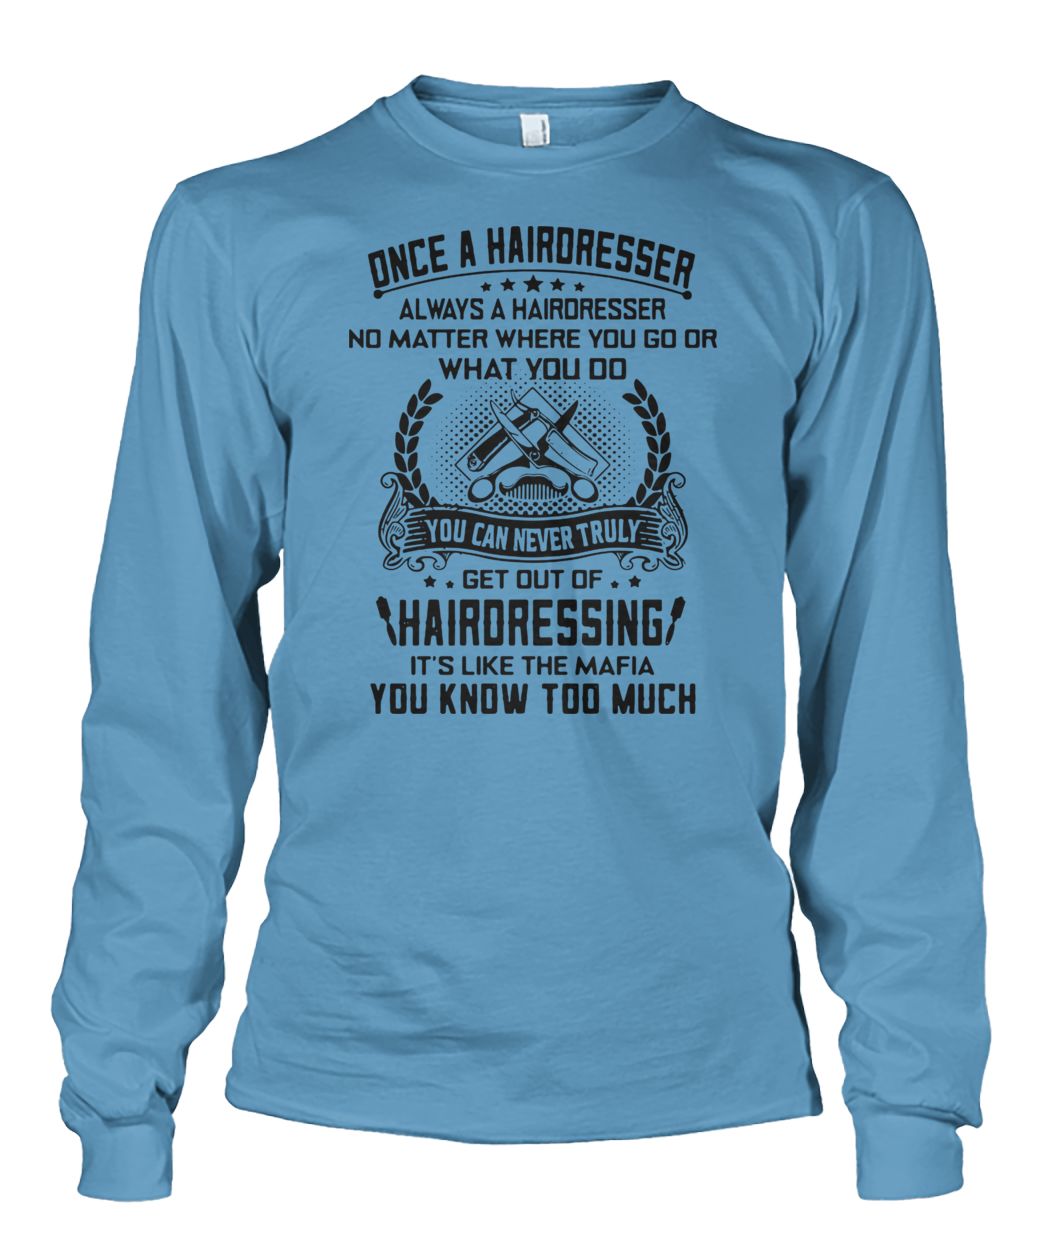 Once a hairdresser always a hairdresser no matter where you go or what you do you unisex long sleeve